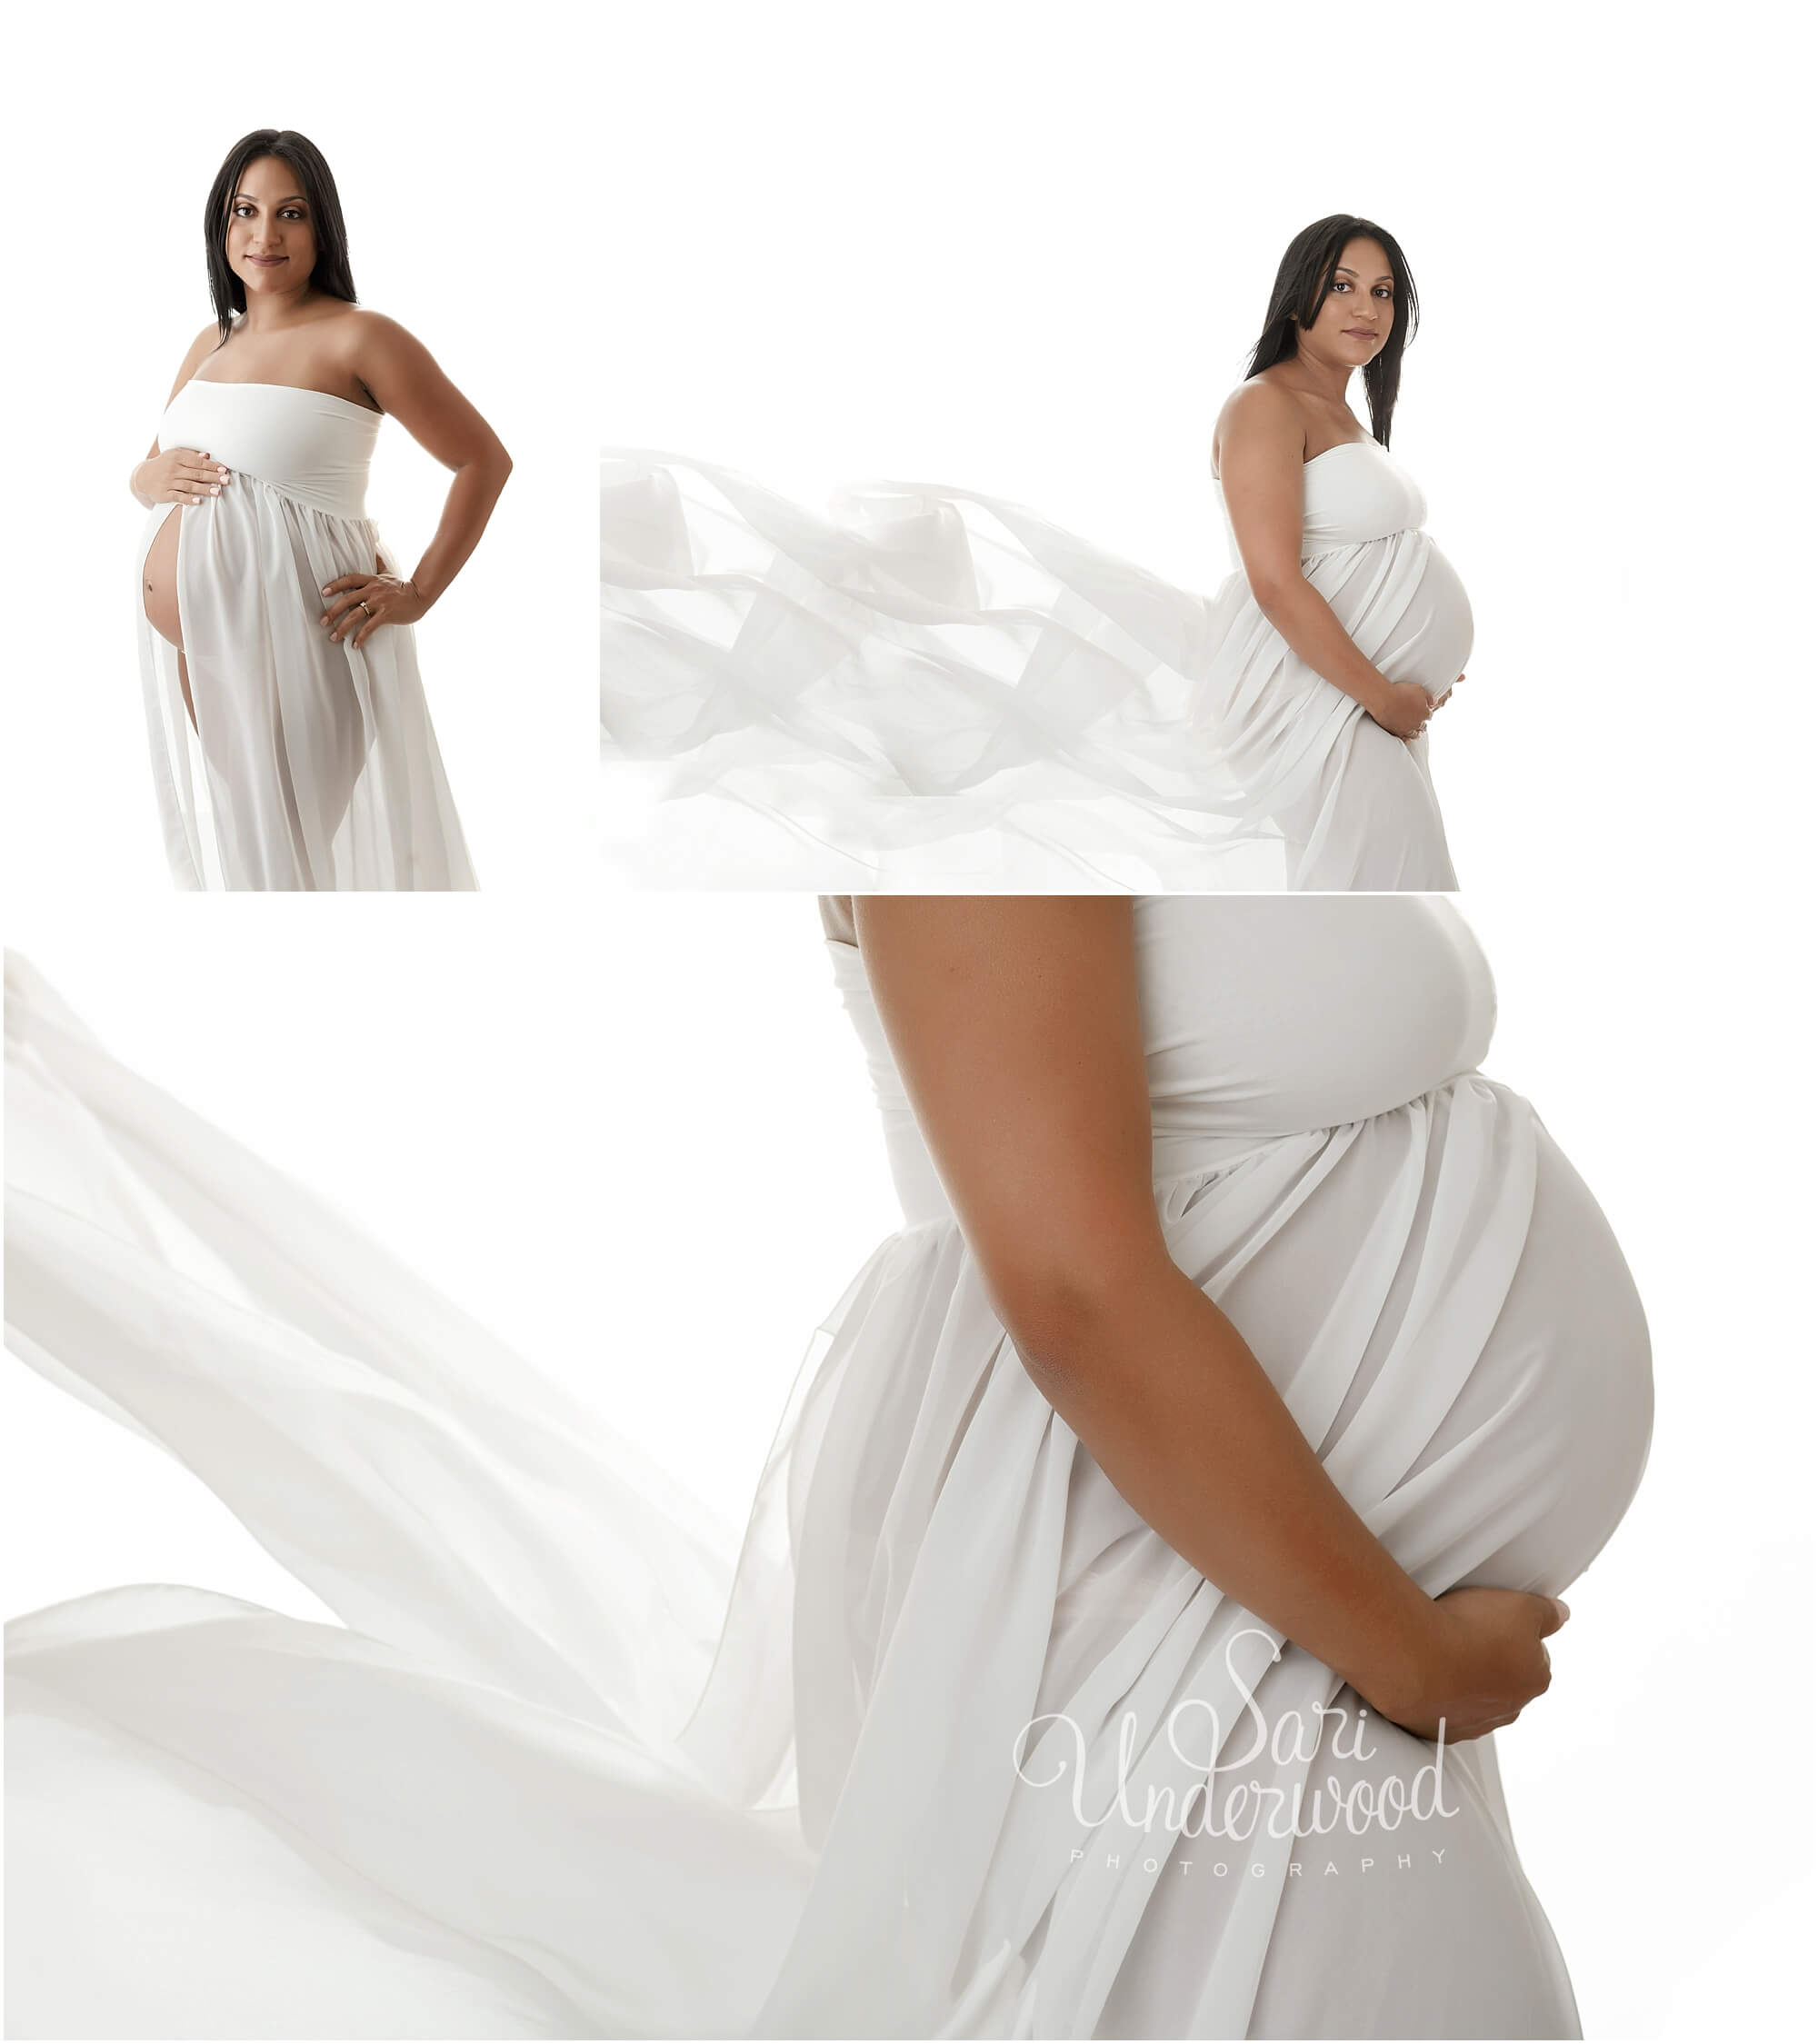 Central Florida Outdoor and Studio Maternity Portraits